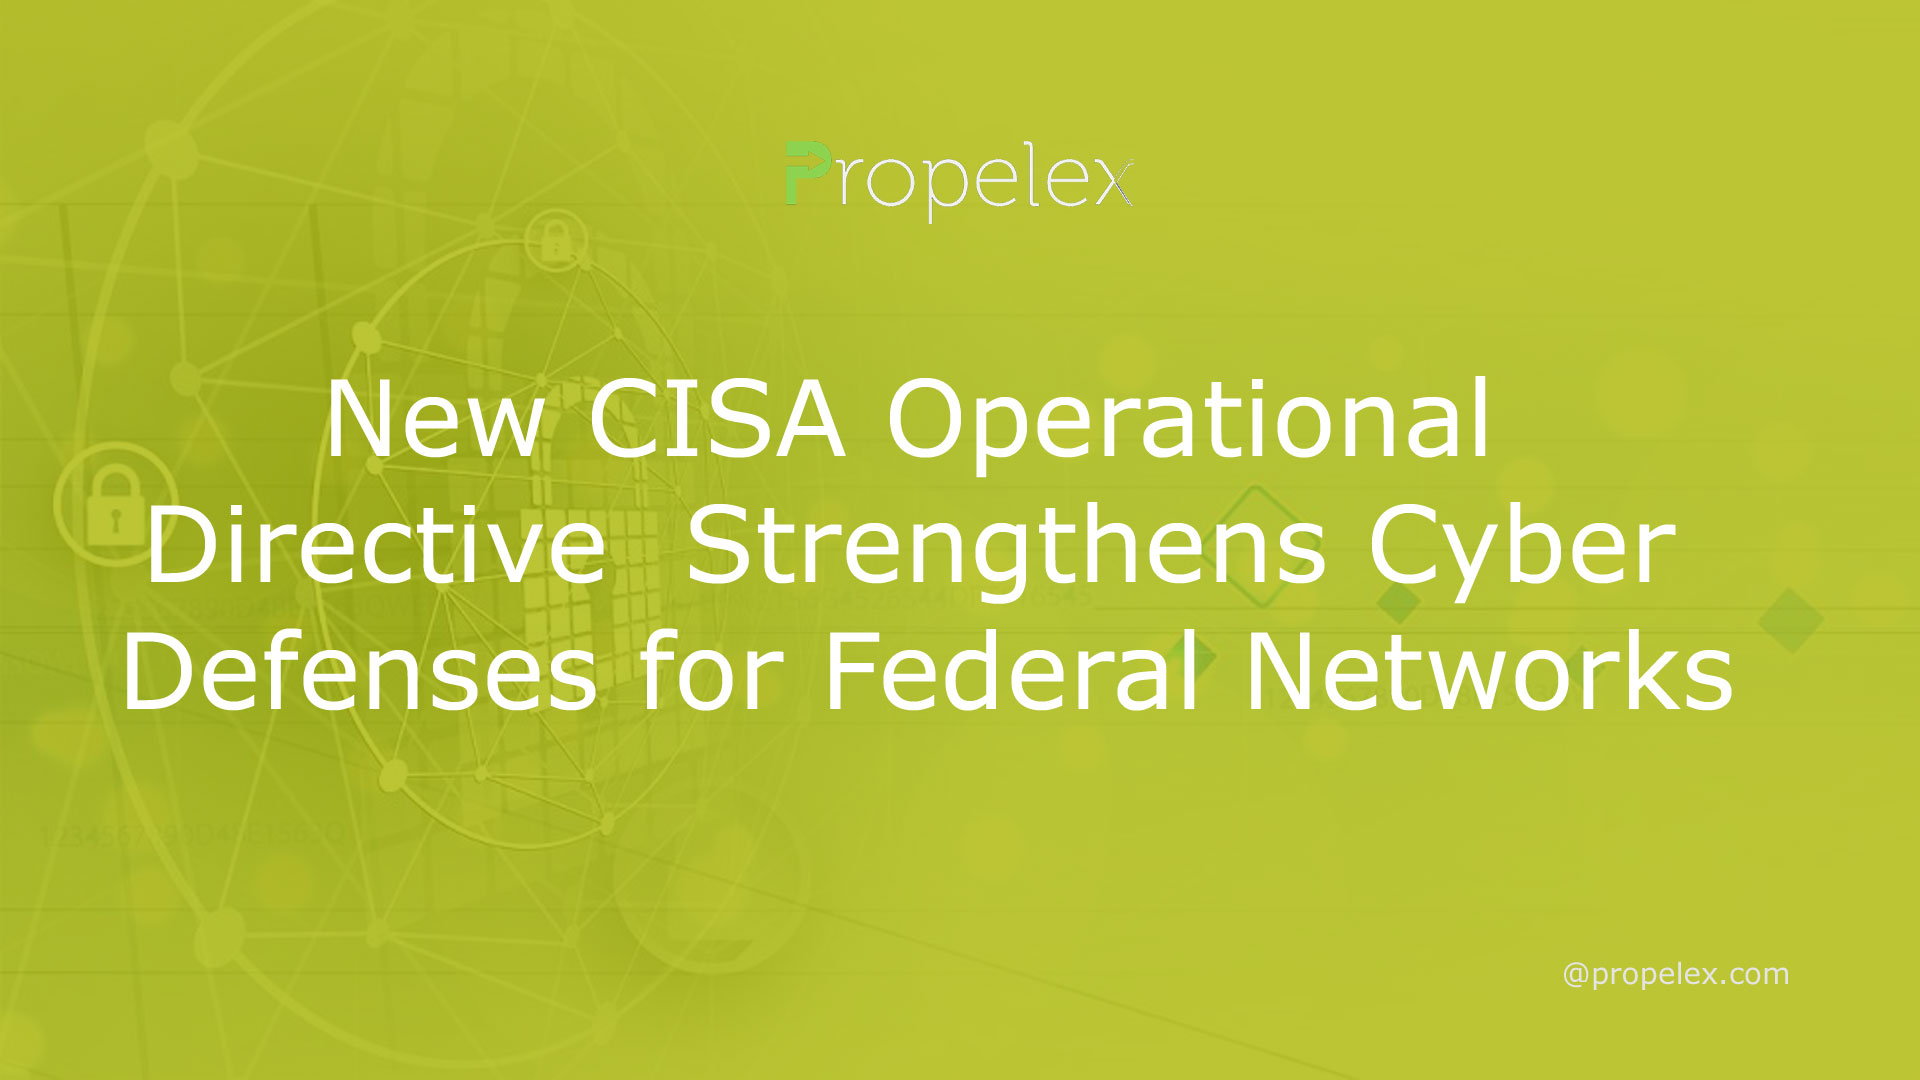 New CISA Operational Directive Strengthens Cyber Defenses for Federal Networks